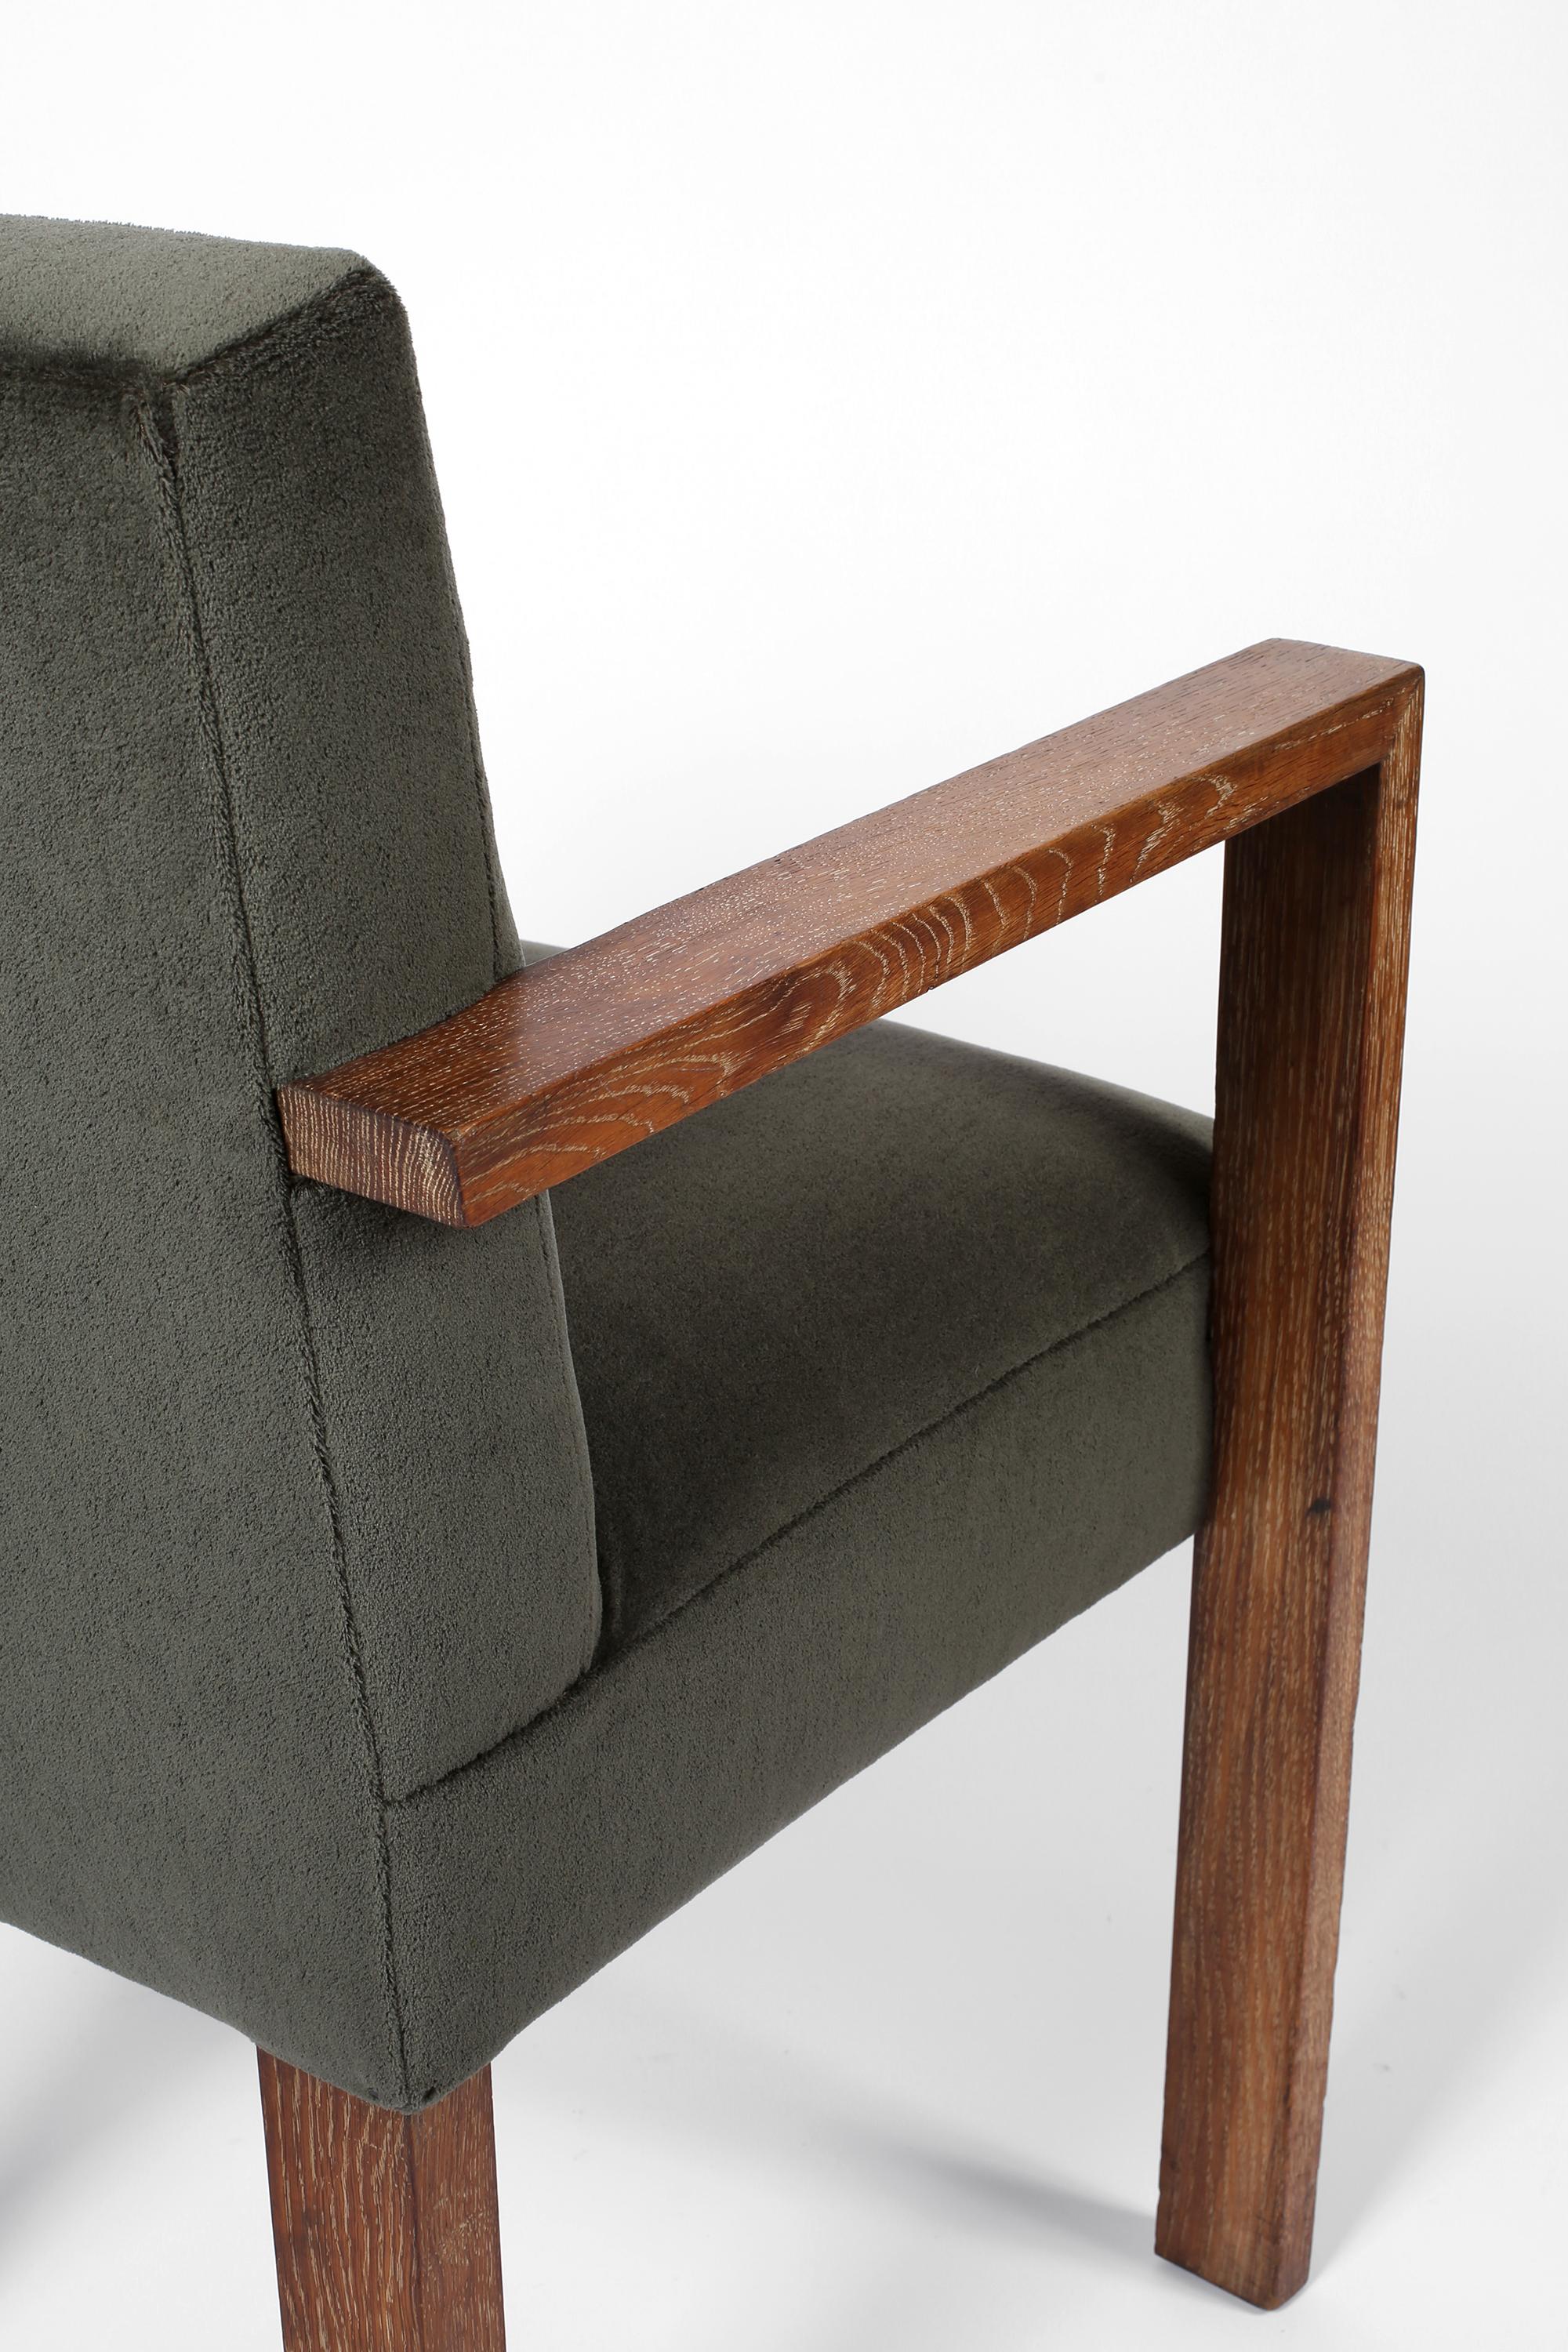 1940s French Modernist Armchair in Limed Oak and Mohair 3